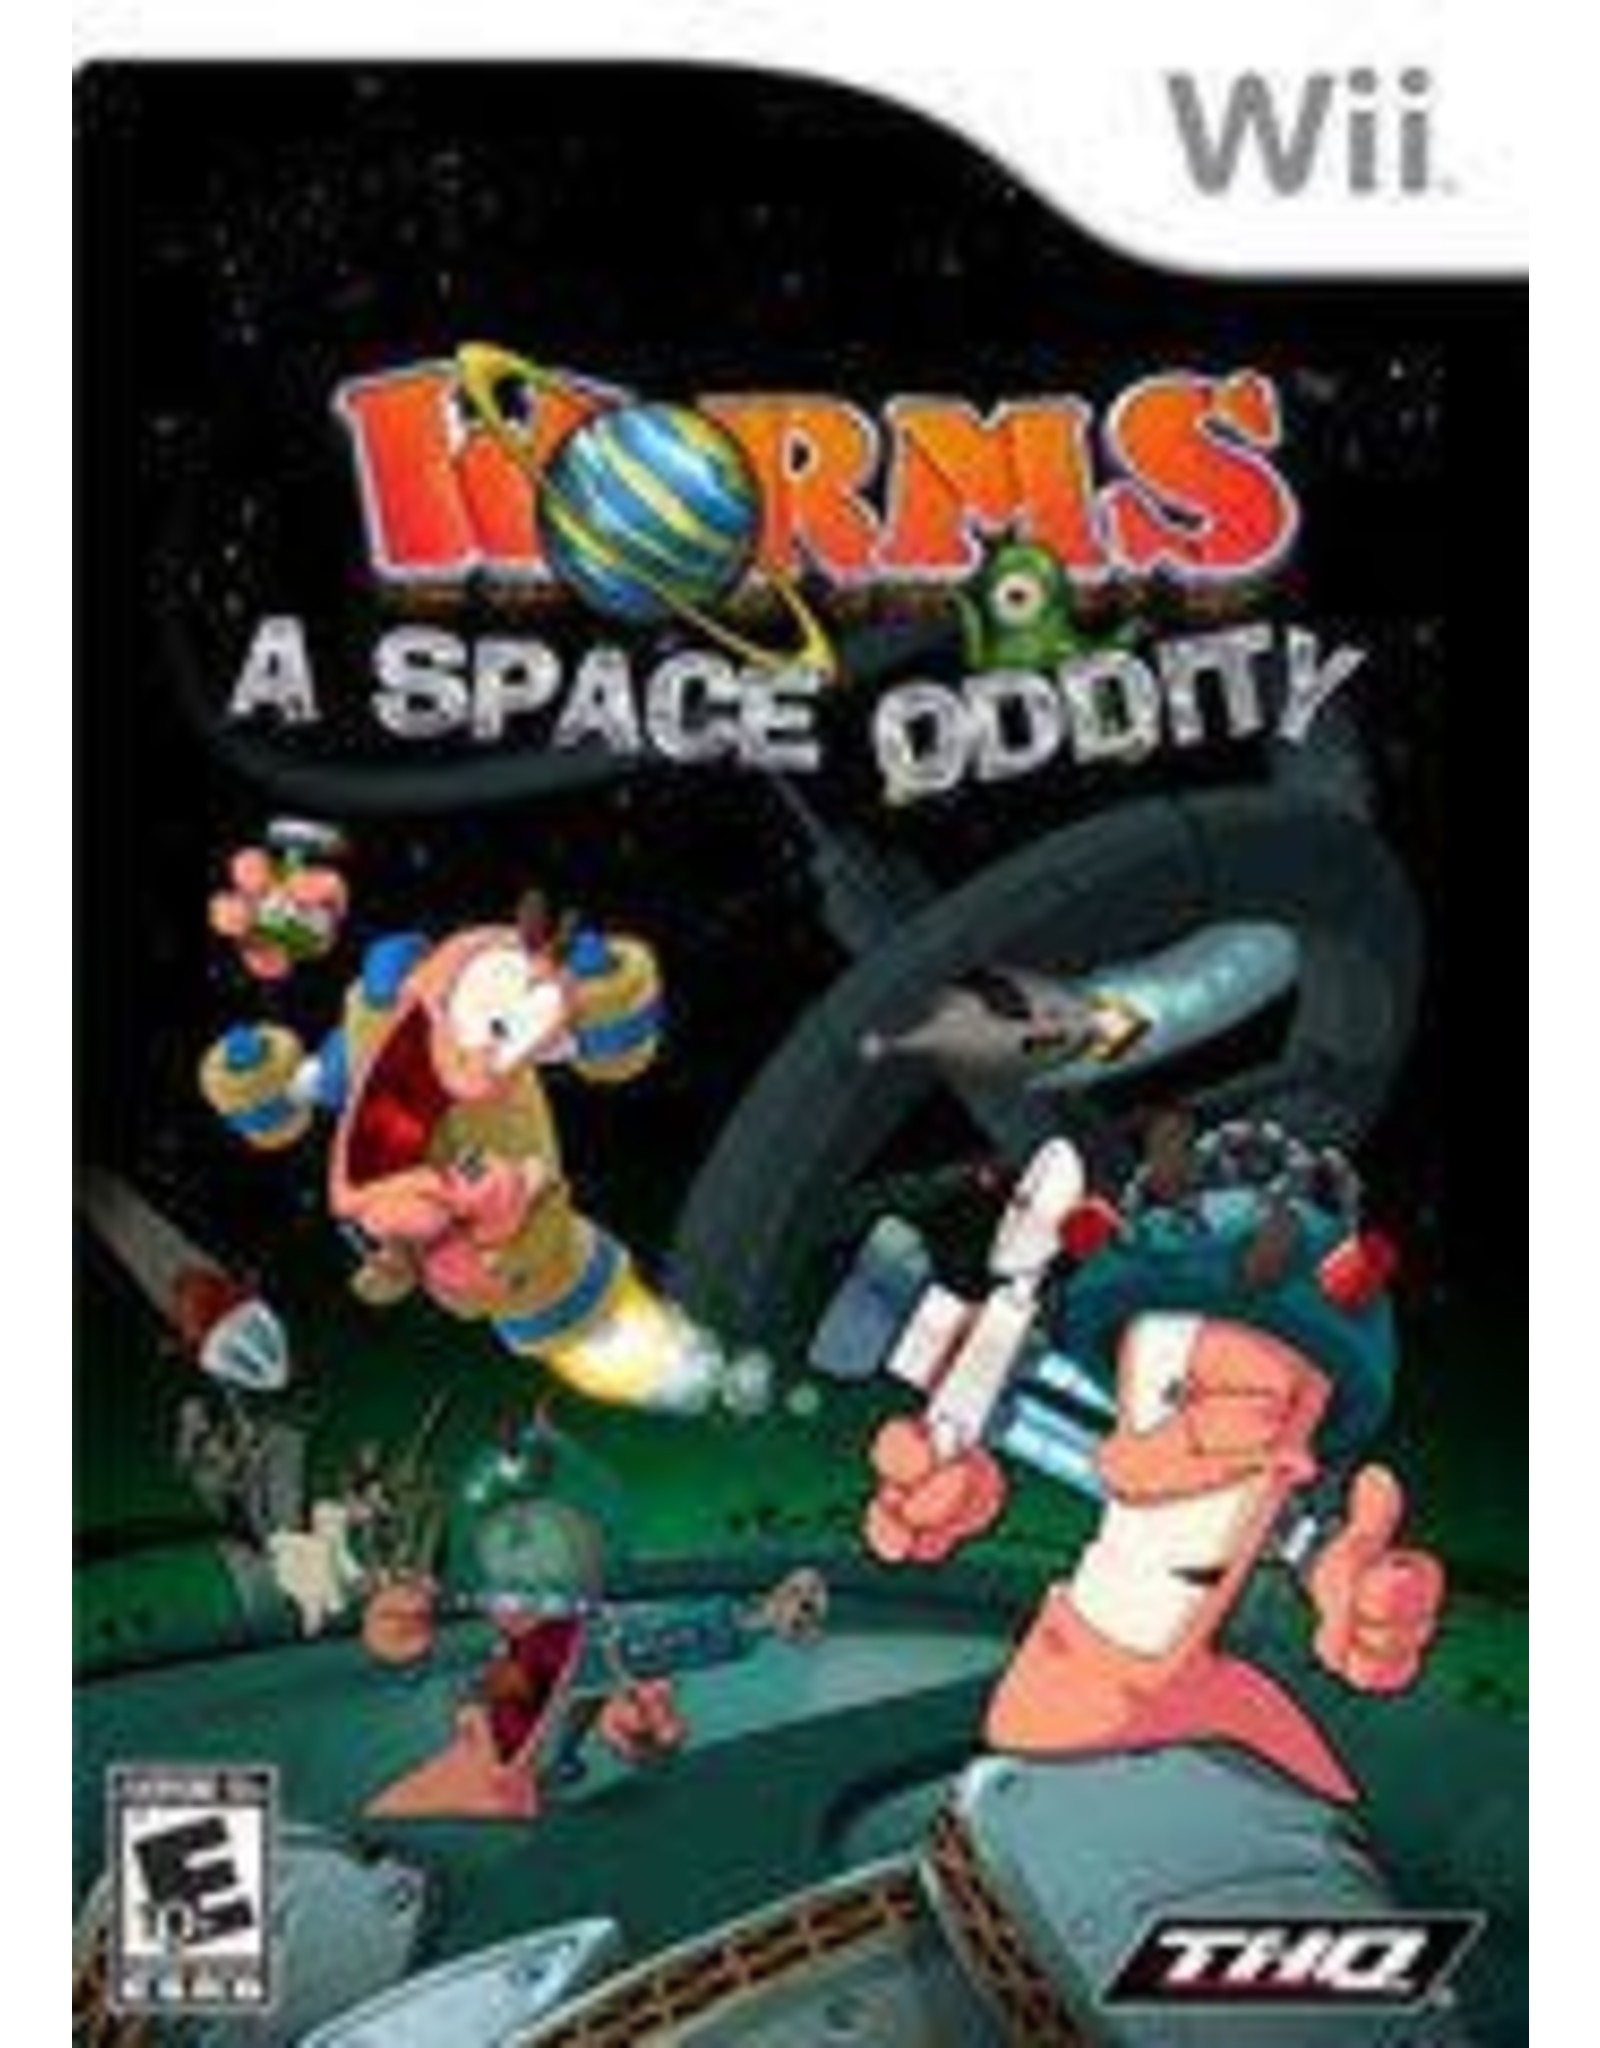 Wii Worms A Space Oddity (CiB)